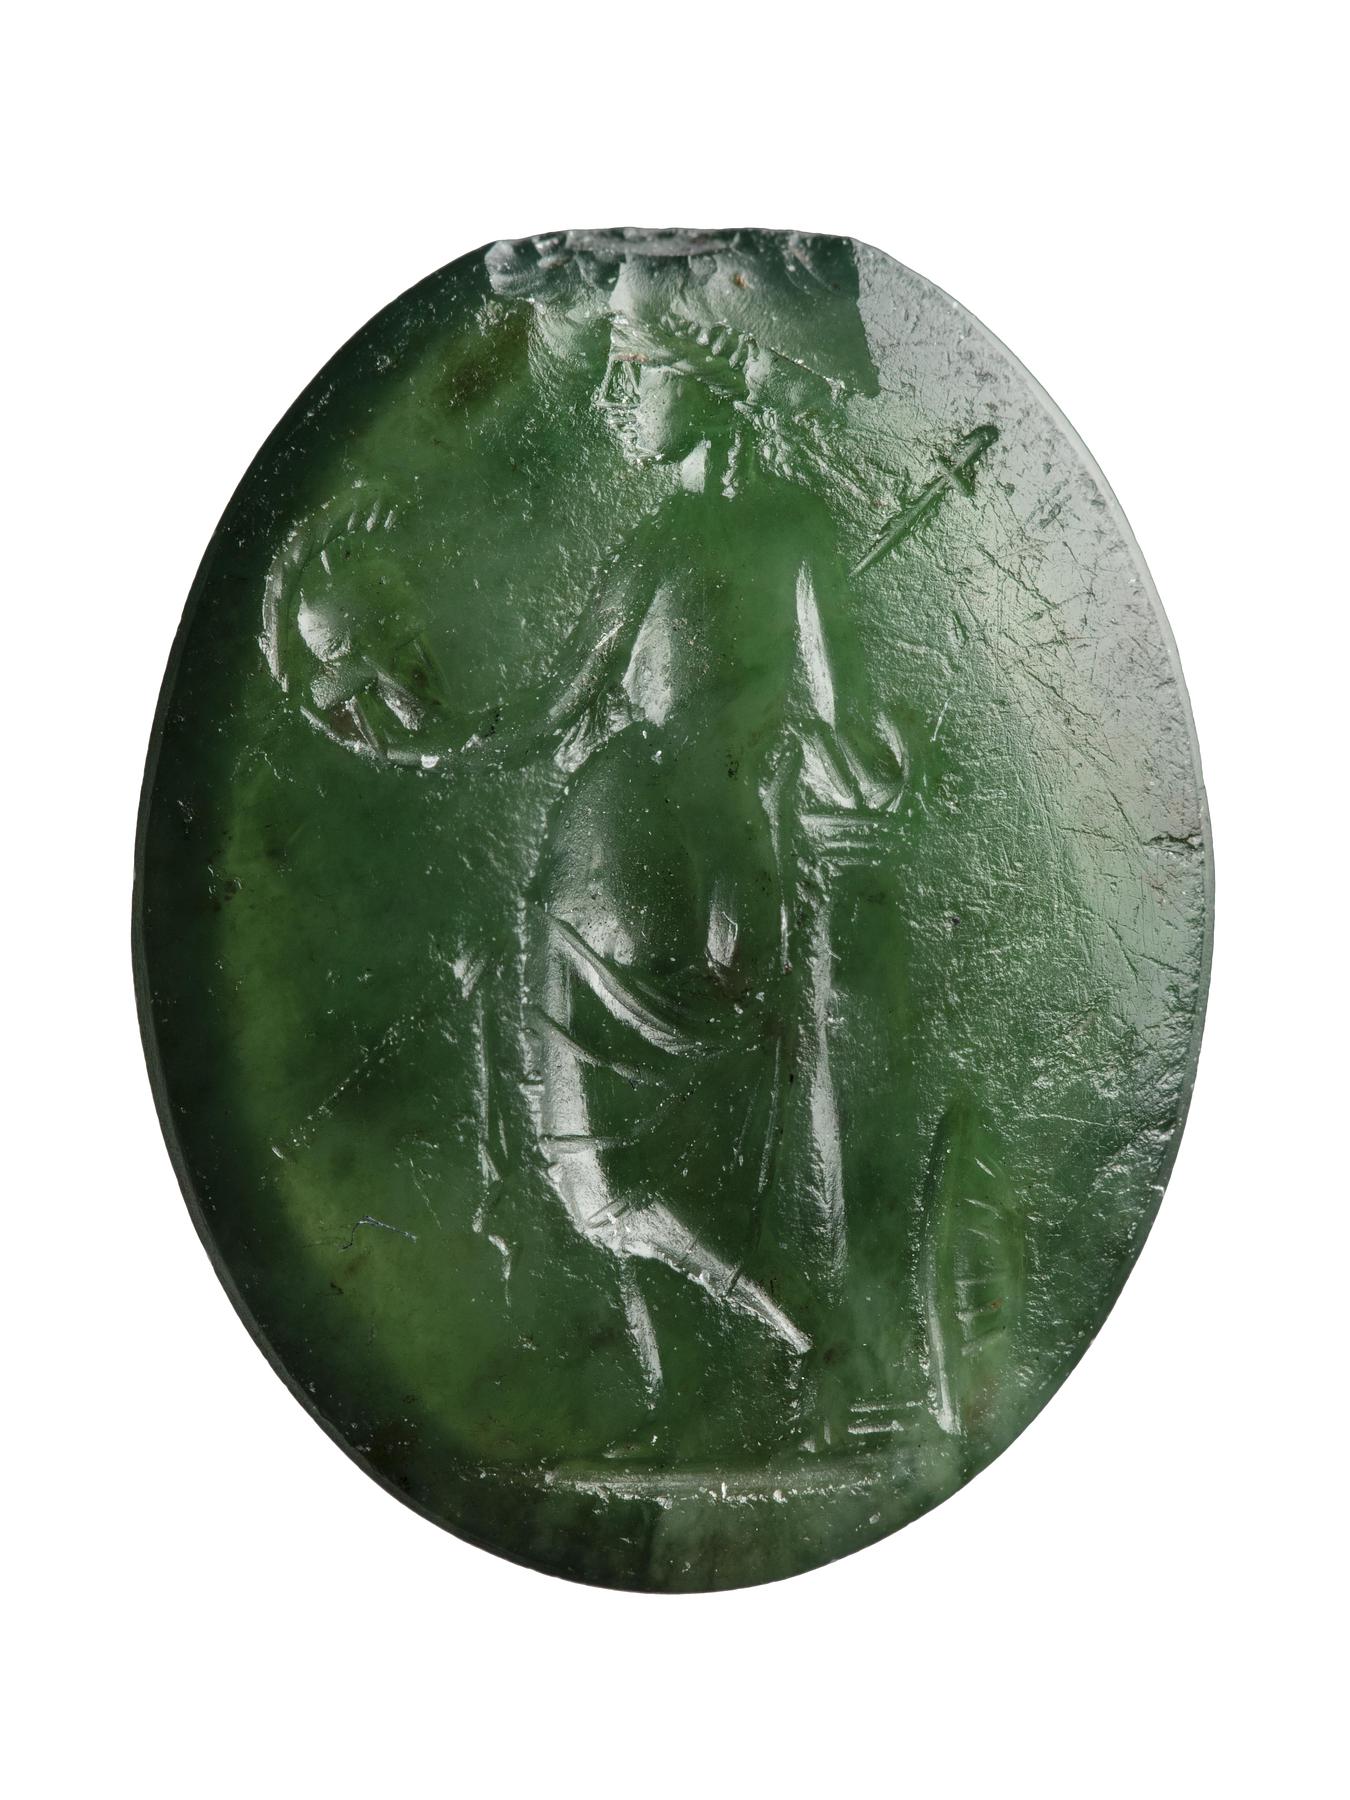 Venus Victrix with helmet, spear, and shield, I276